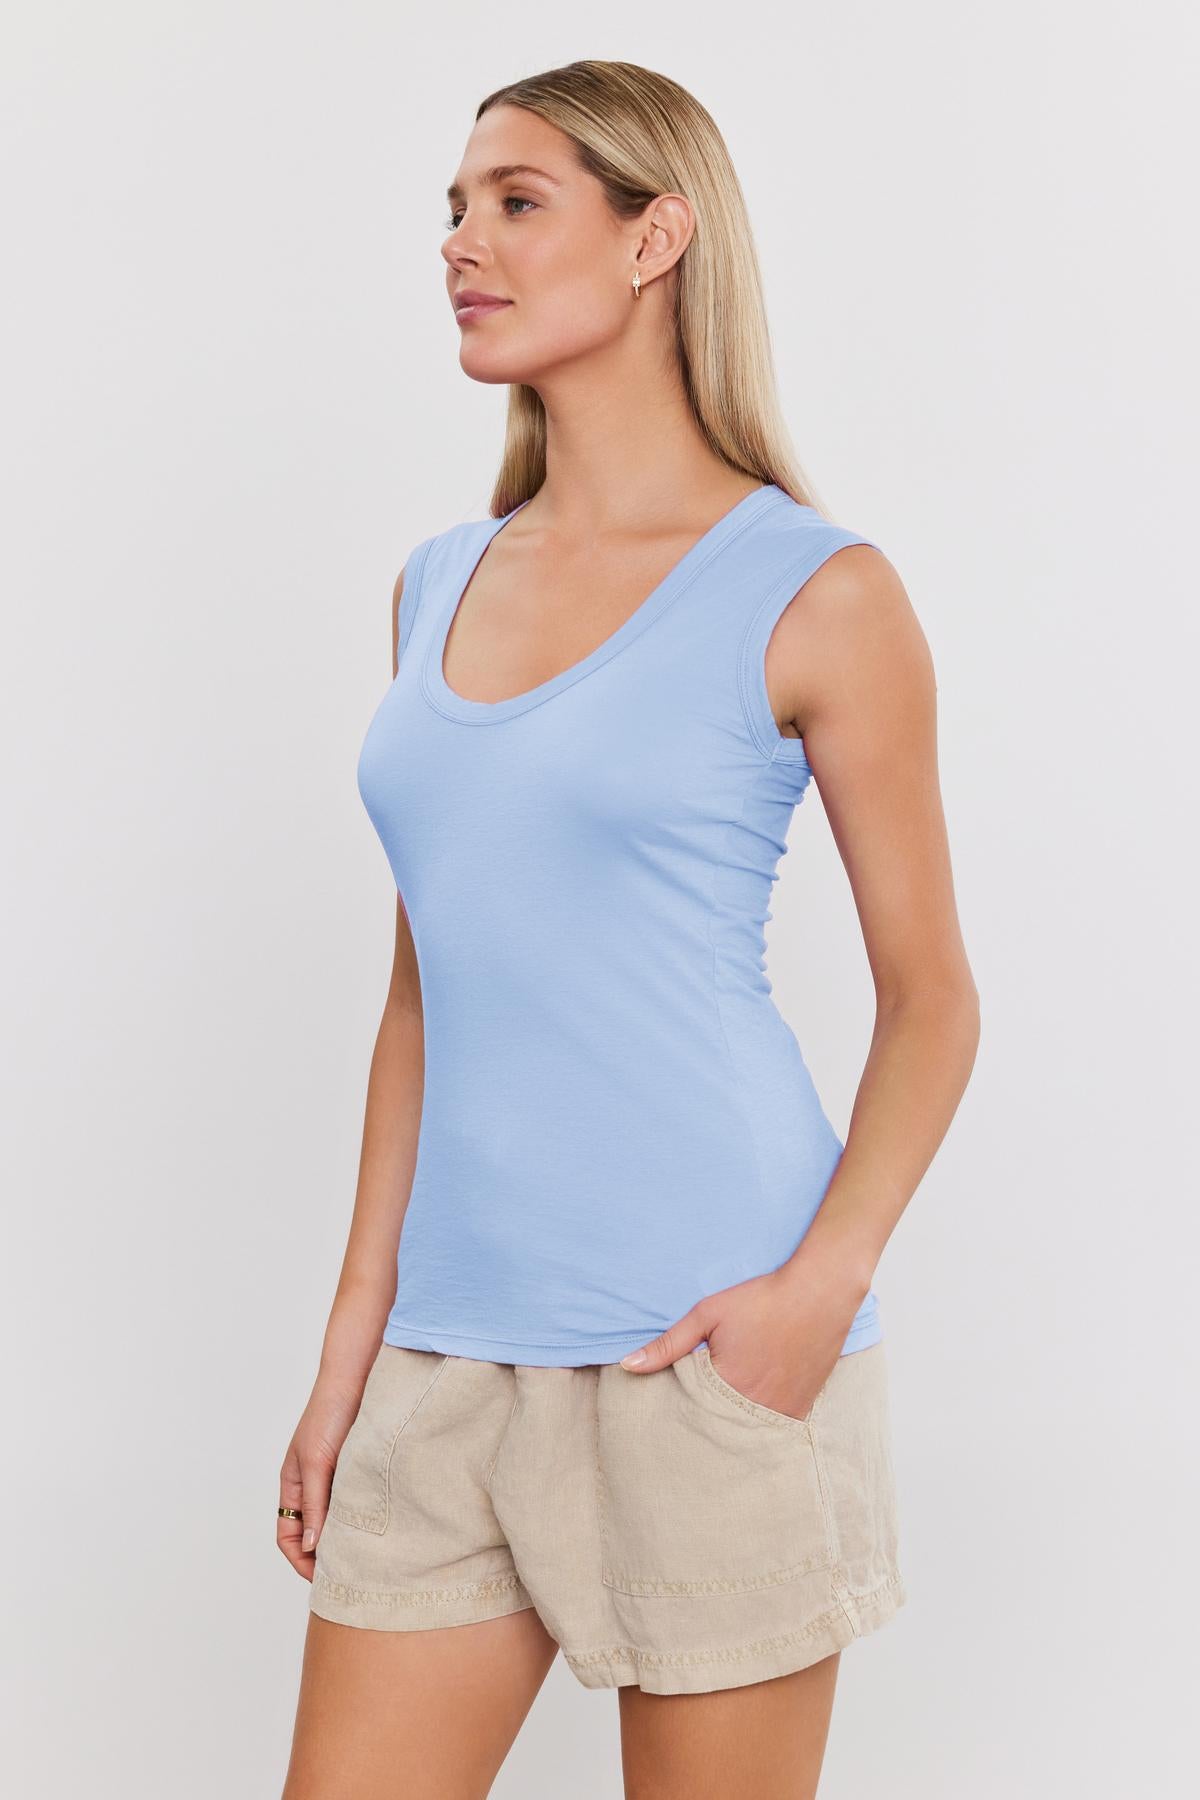   A woman wearing a Velvet by Graham & Spencer Estina Gaucy Whisper fitted tank top in light blue, paired with beige shorts, standing profile to the camera with a neutral expression. 